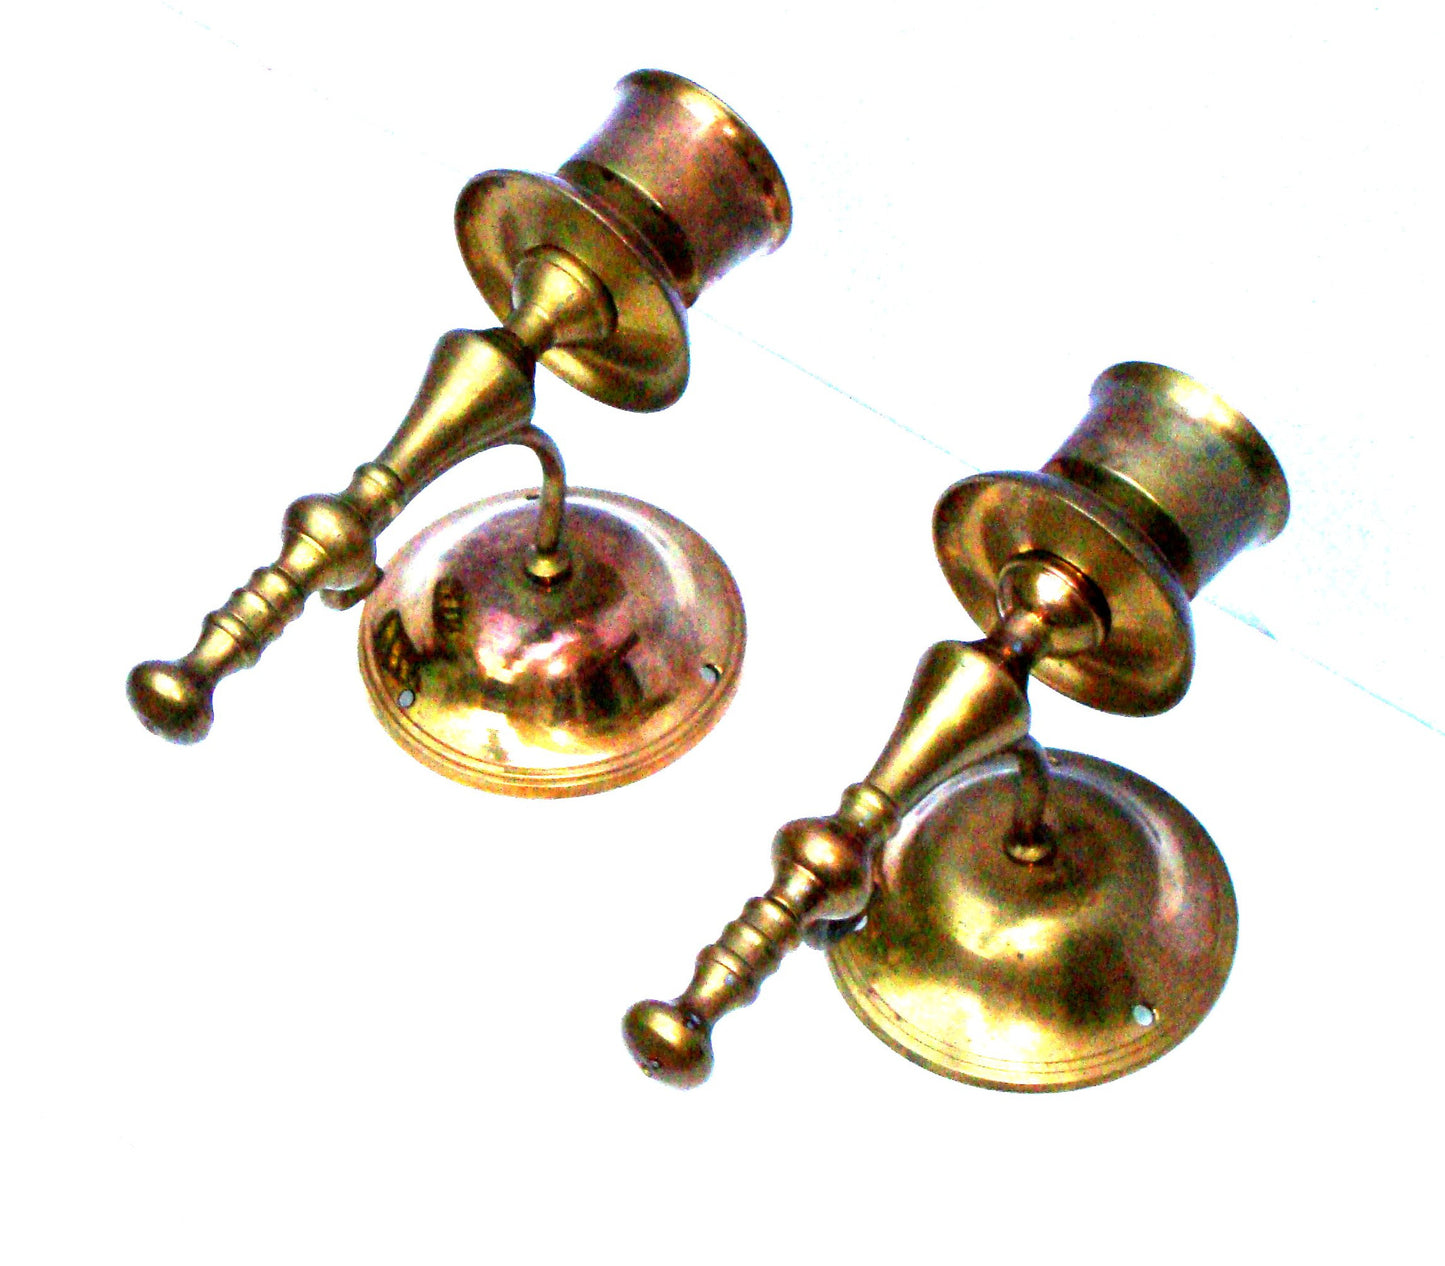 [SOLD] Victorian Gothic Regency Deco Brass Candle Sconces